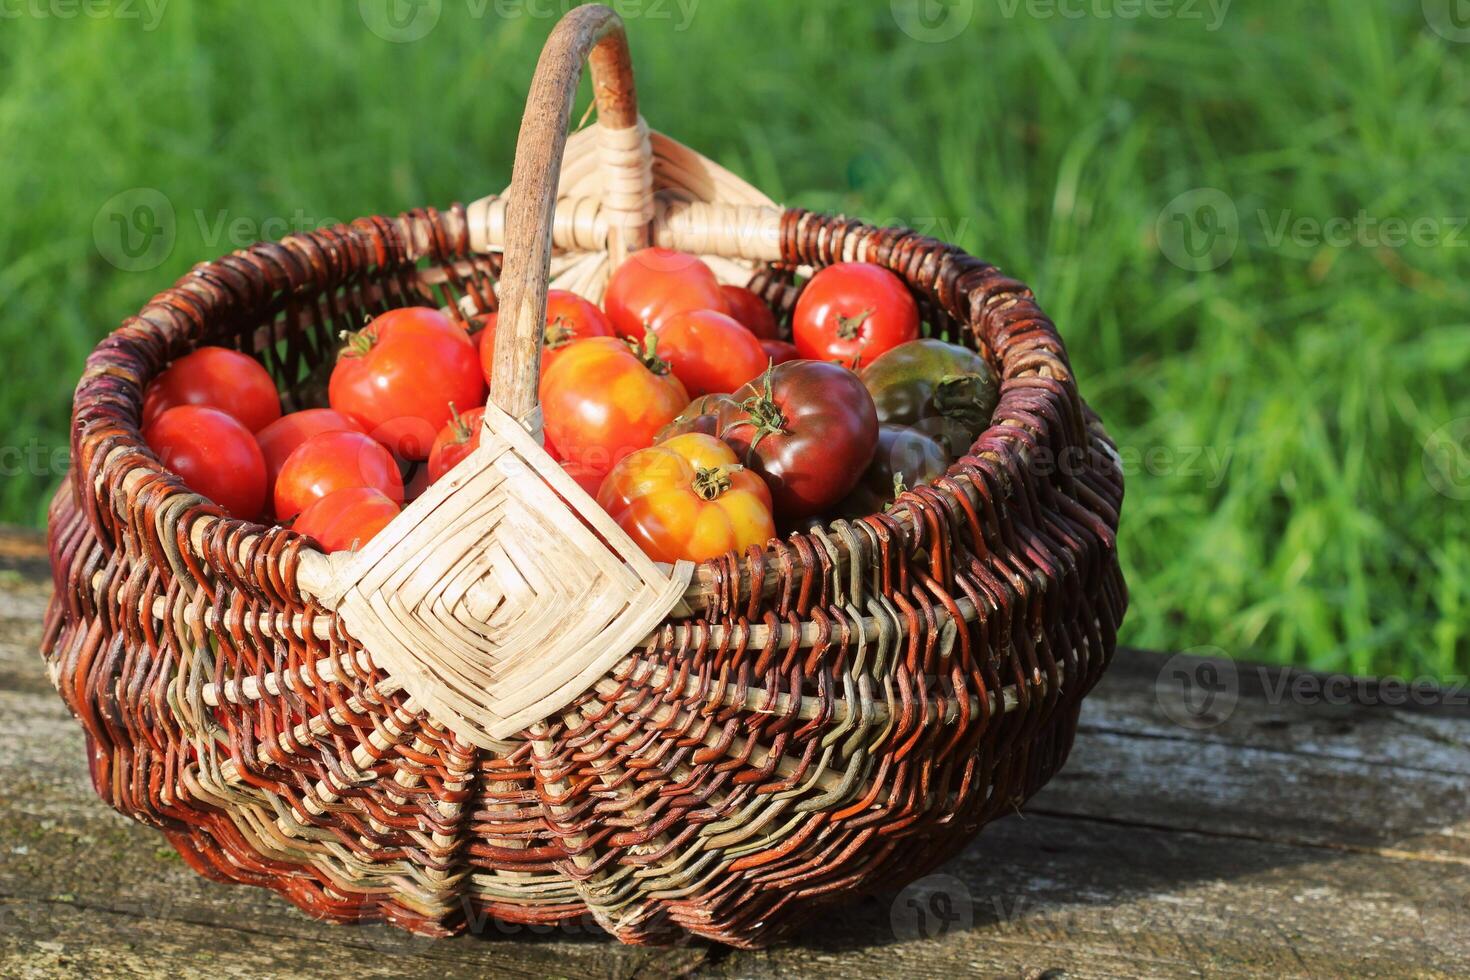 Heirloom variety tomatoes in baskets on rustic table. Colorful tomato - red,yellow , orange. Harvest vegetable cooking conception. Full basket of tometoes in green background photo